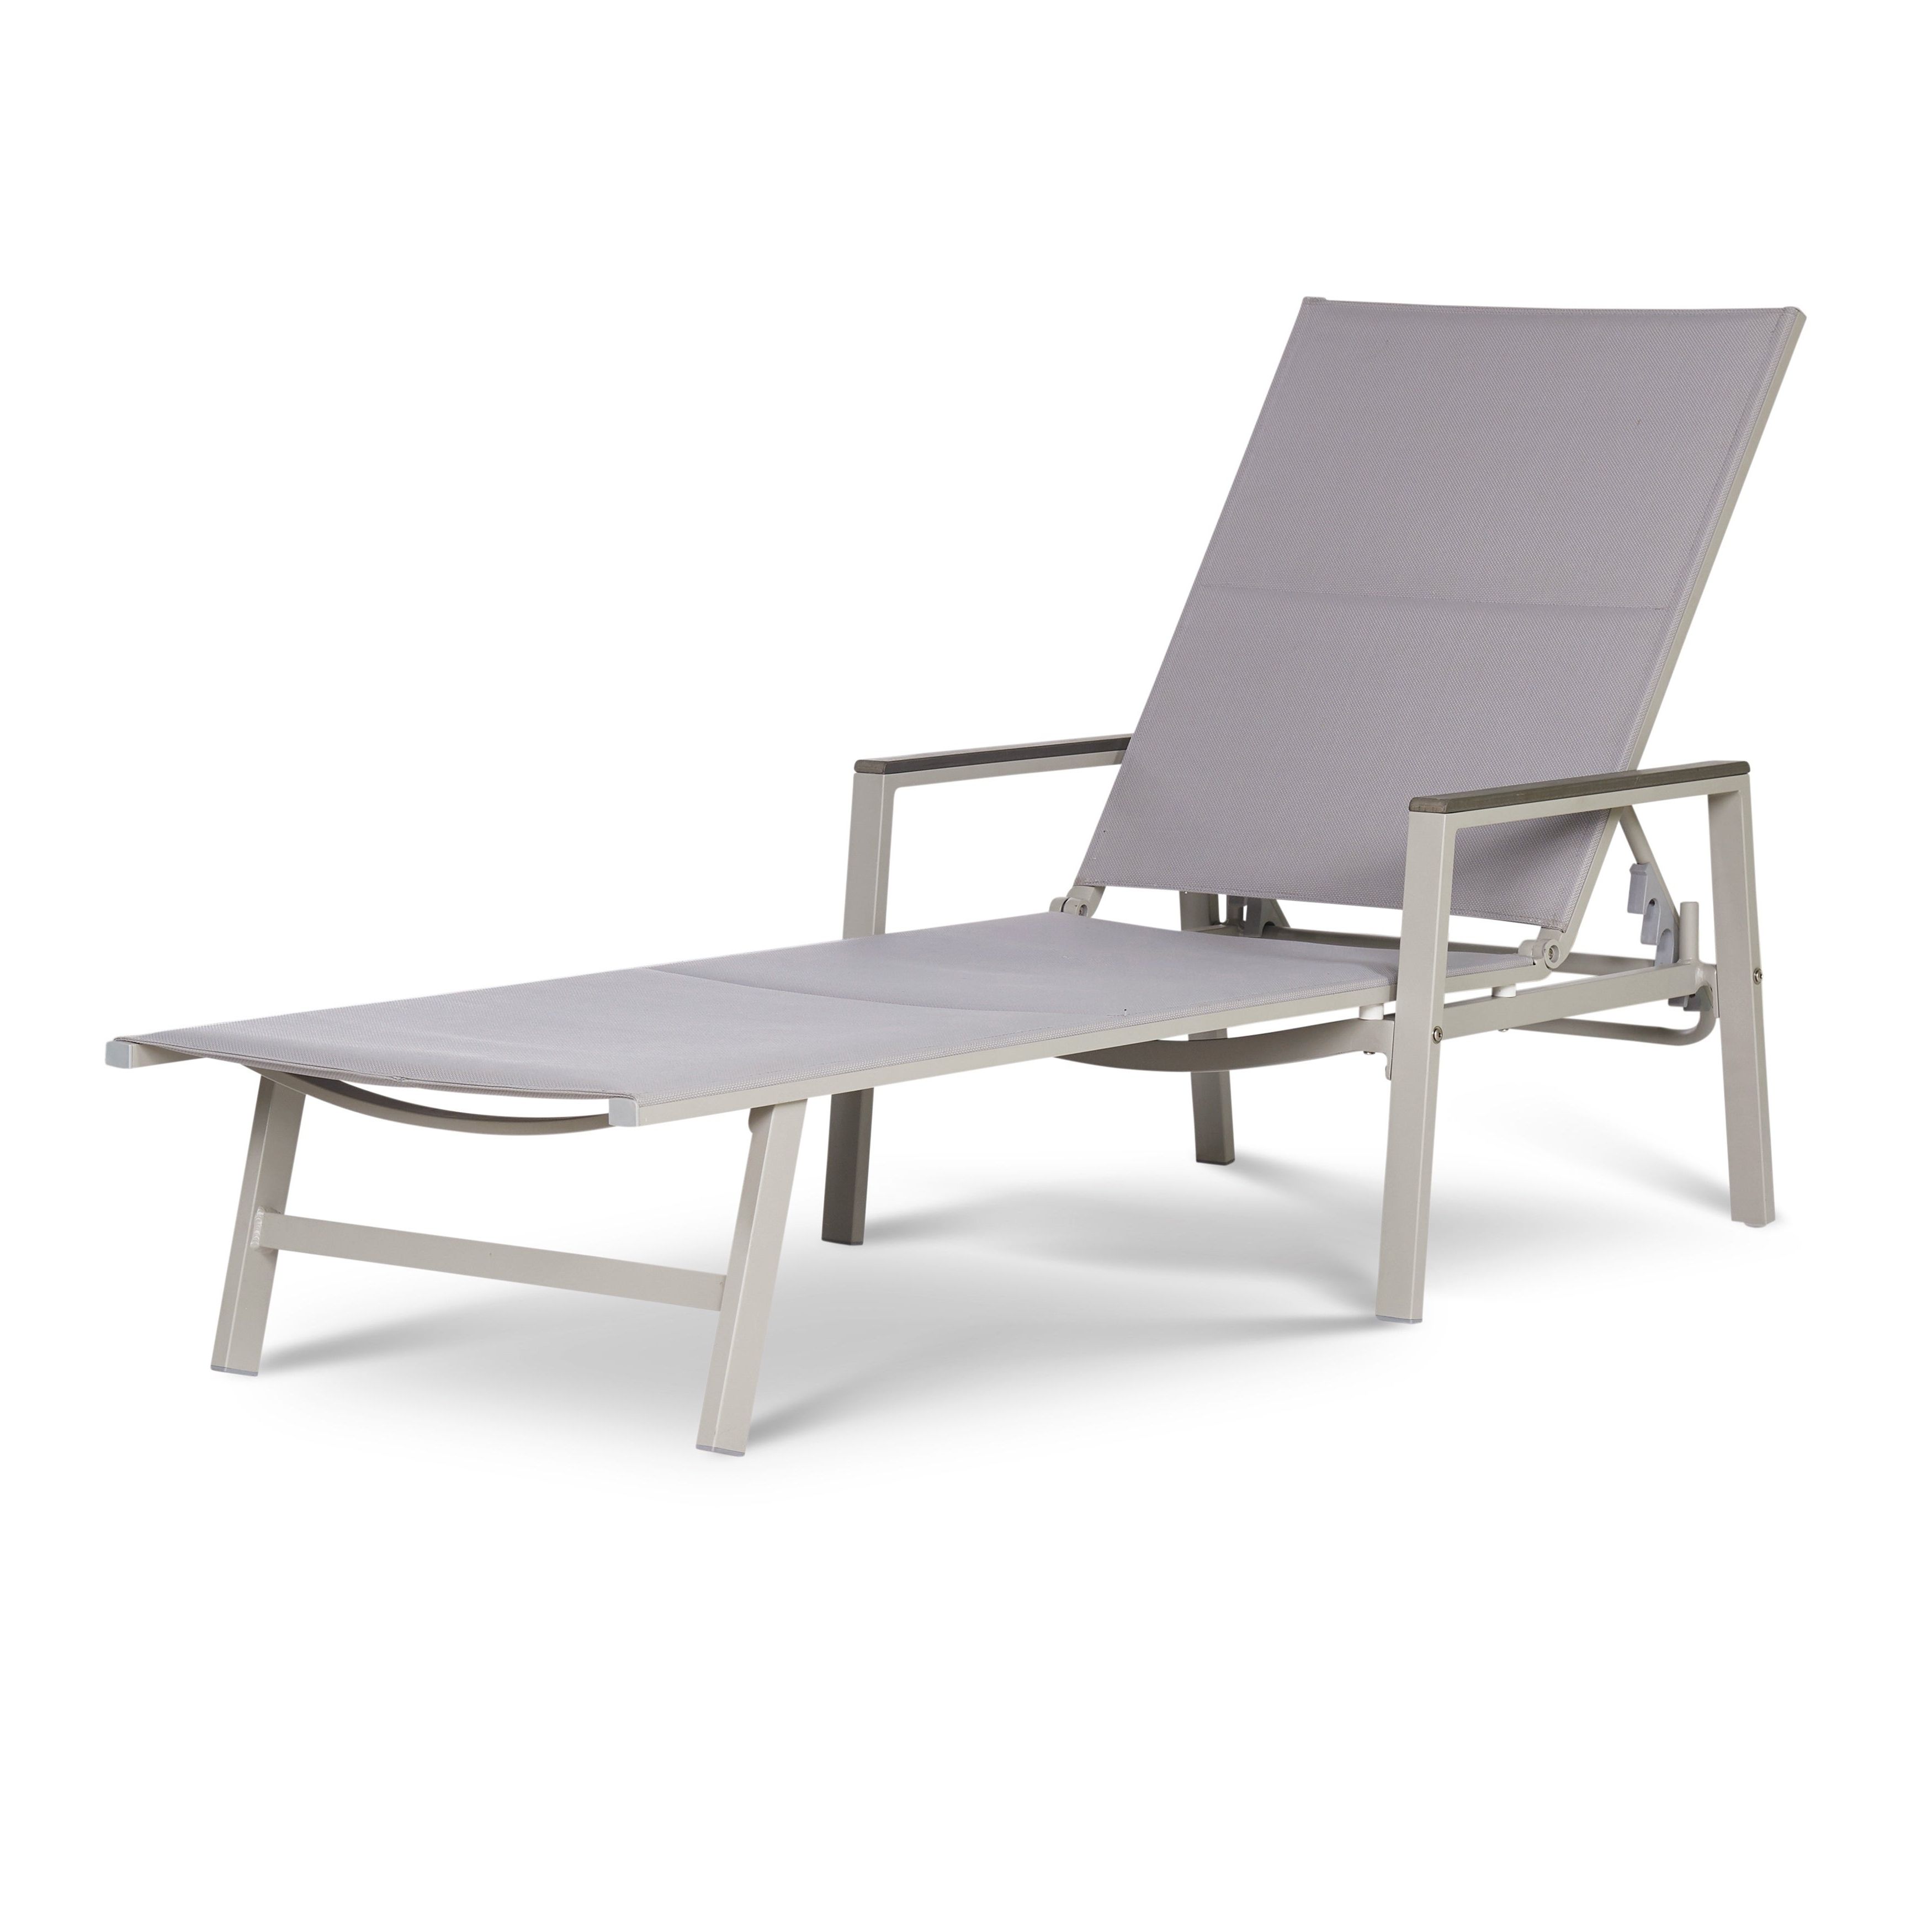 Sling Patio Chaise Lounges In 2019 Positano Grey Sling Patio Chaise Lounge (View 4 of 25)